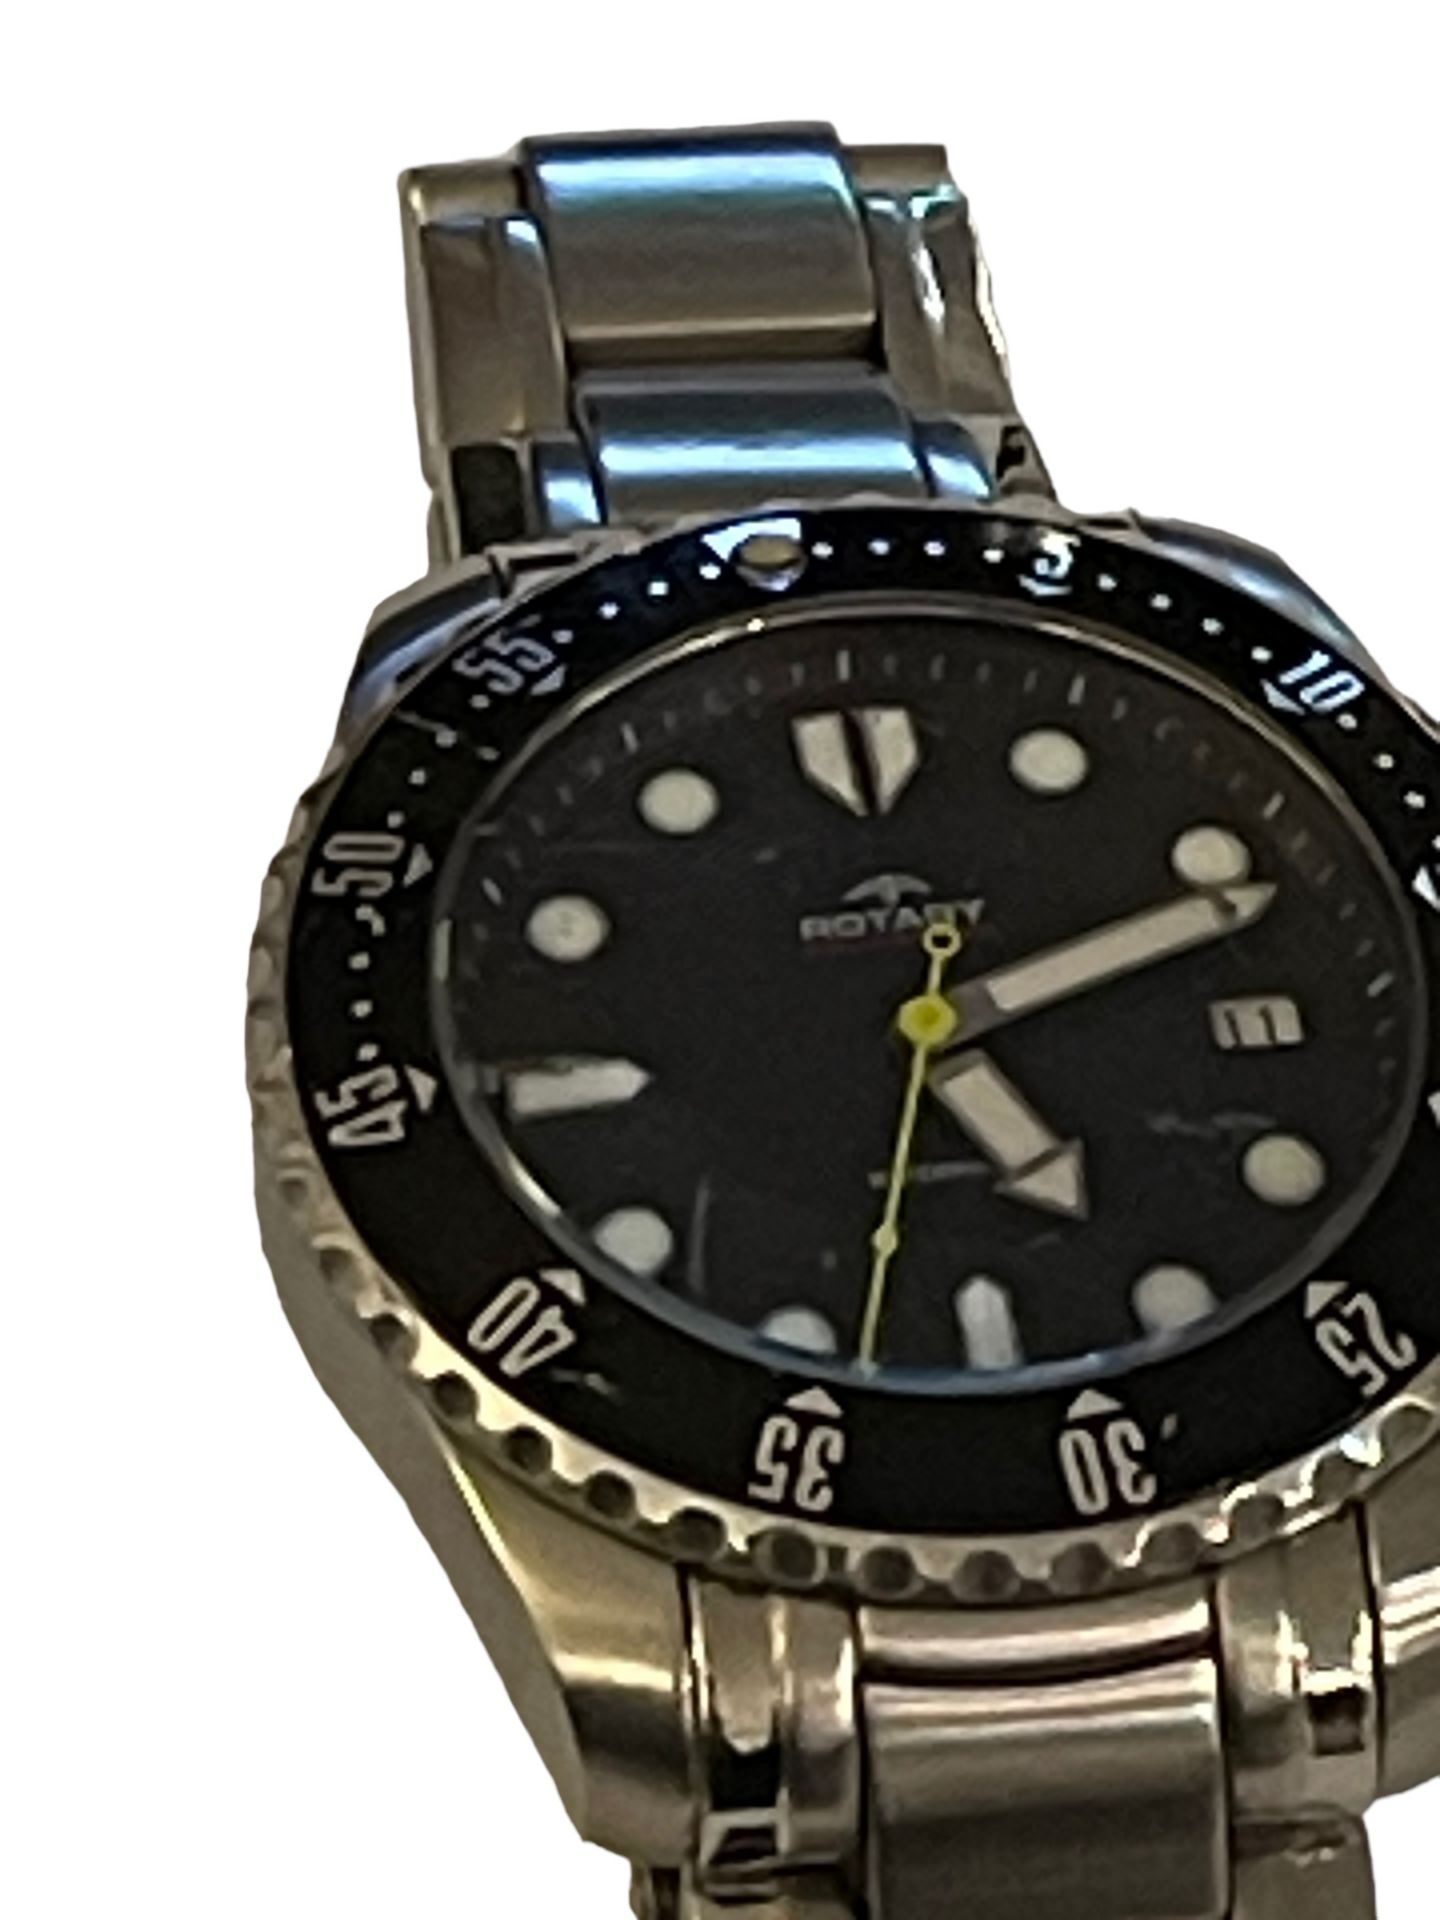 rotary watches return repairs or spares from a private jet charter no reserve - Image 3 of 4